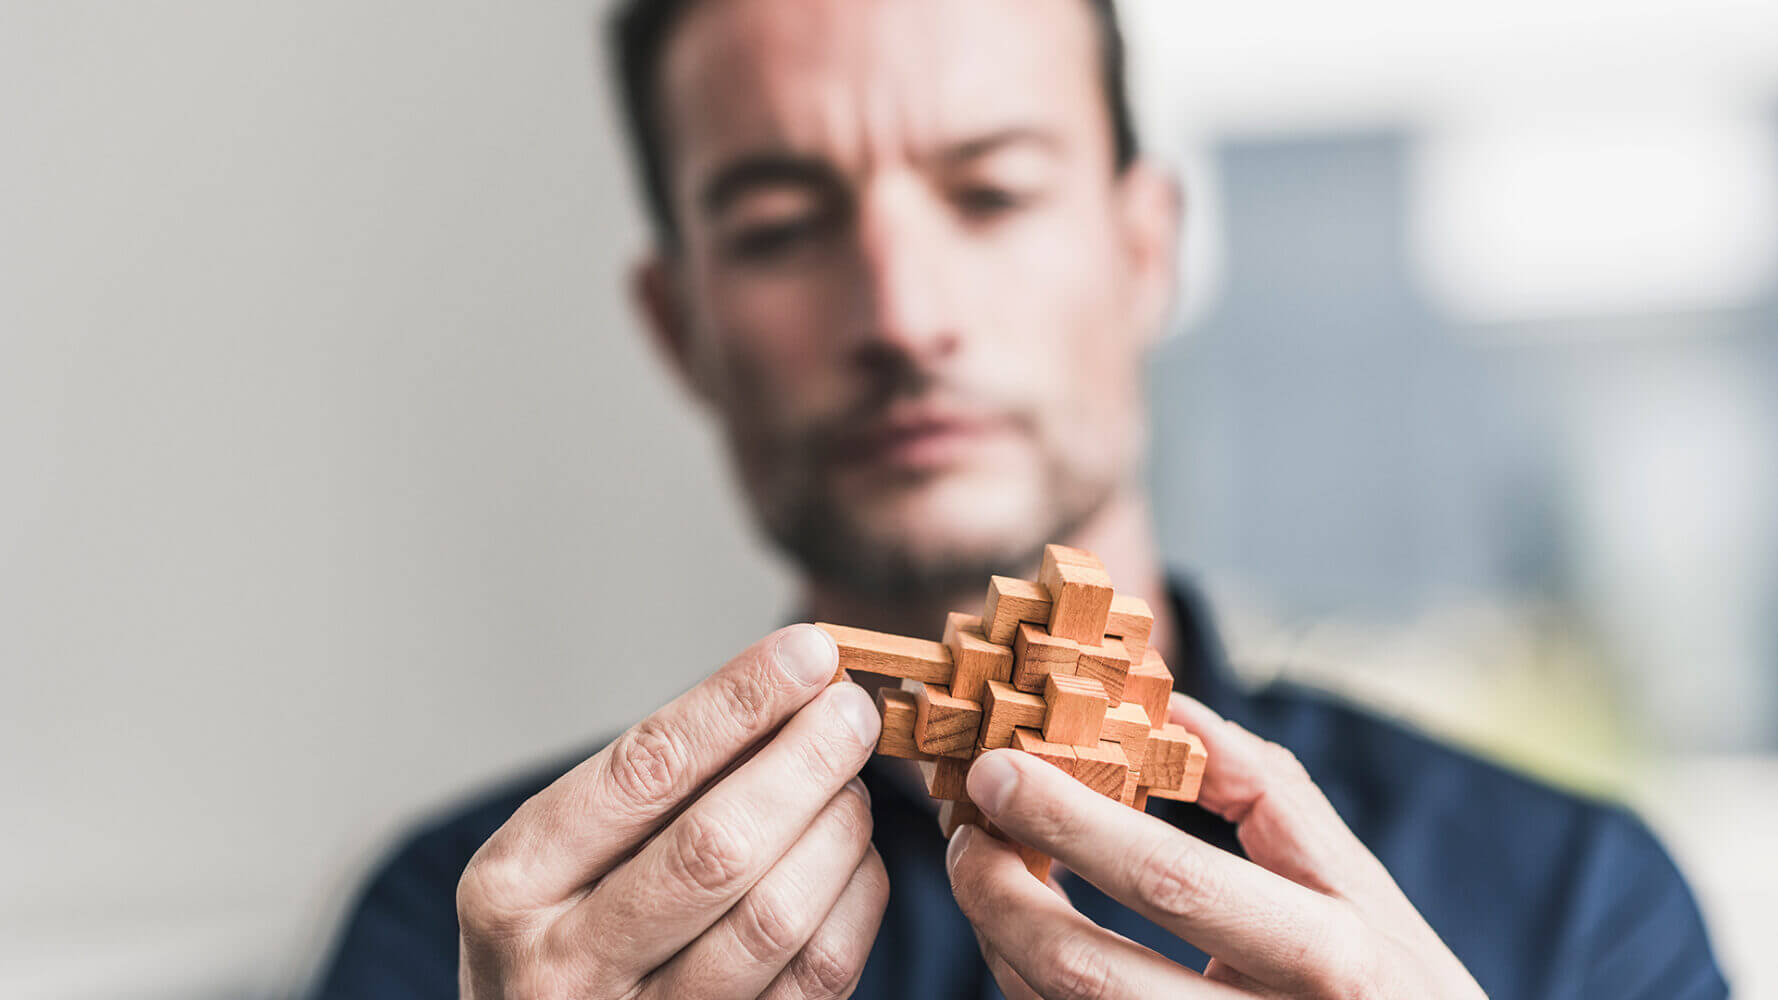 Man looks to figure out wooden puzzle piece.